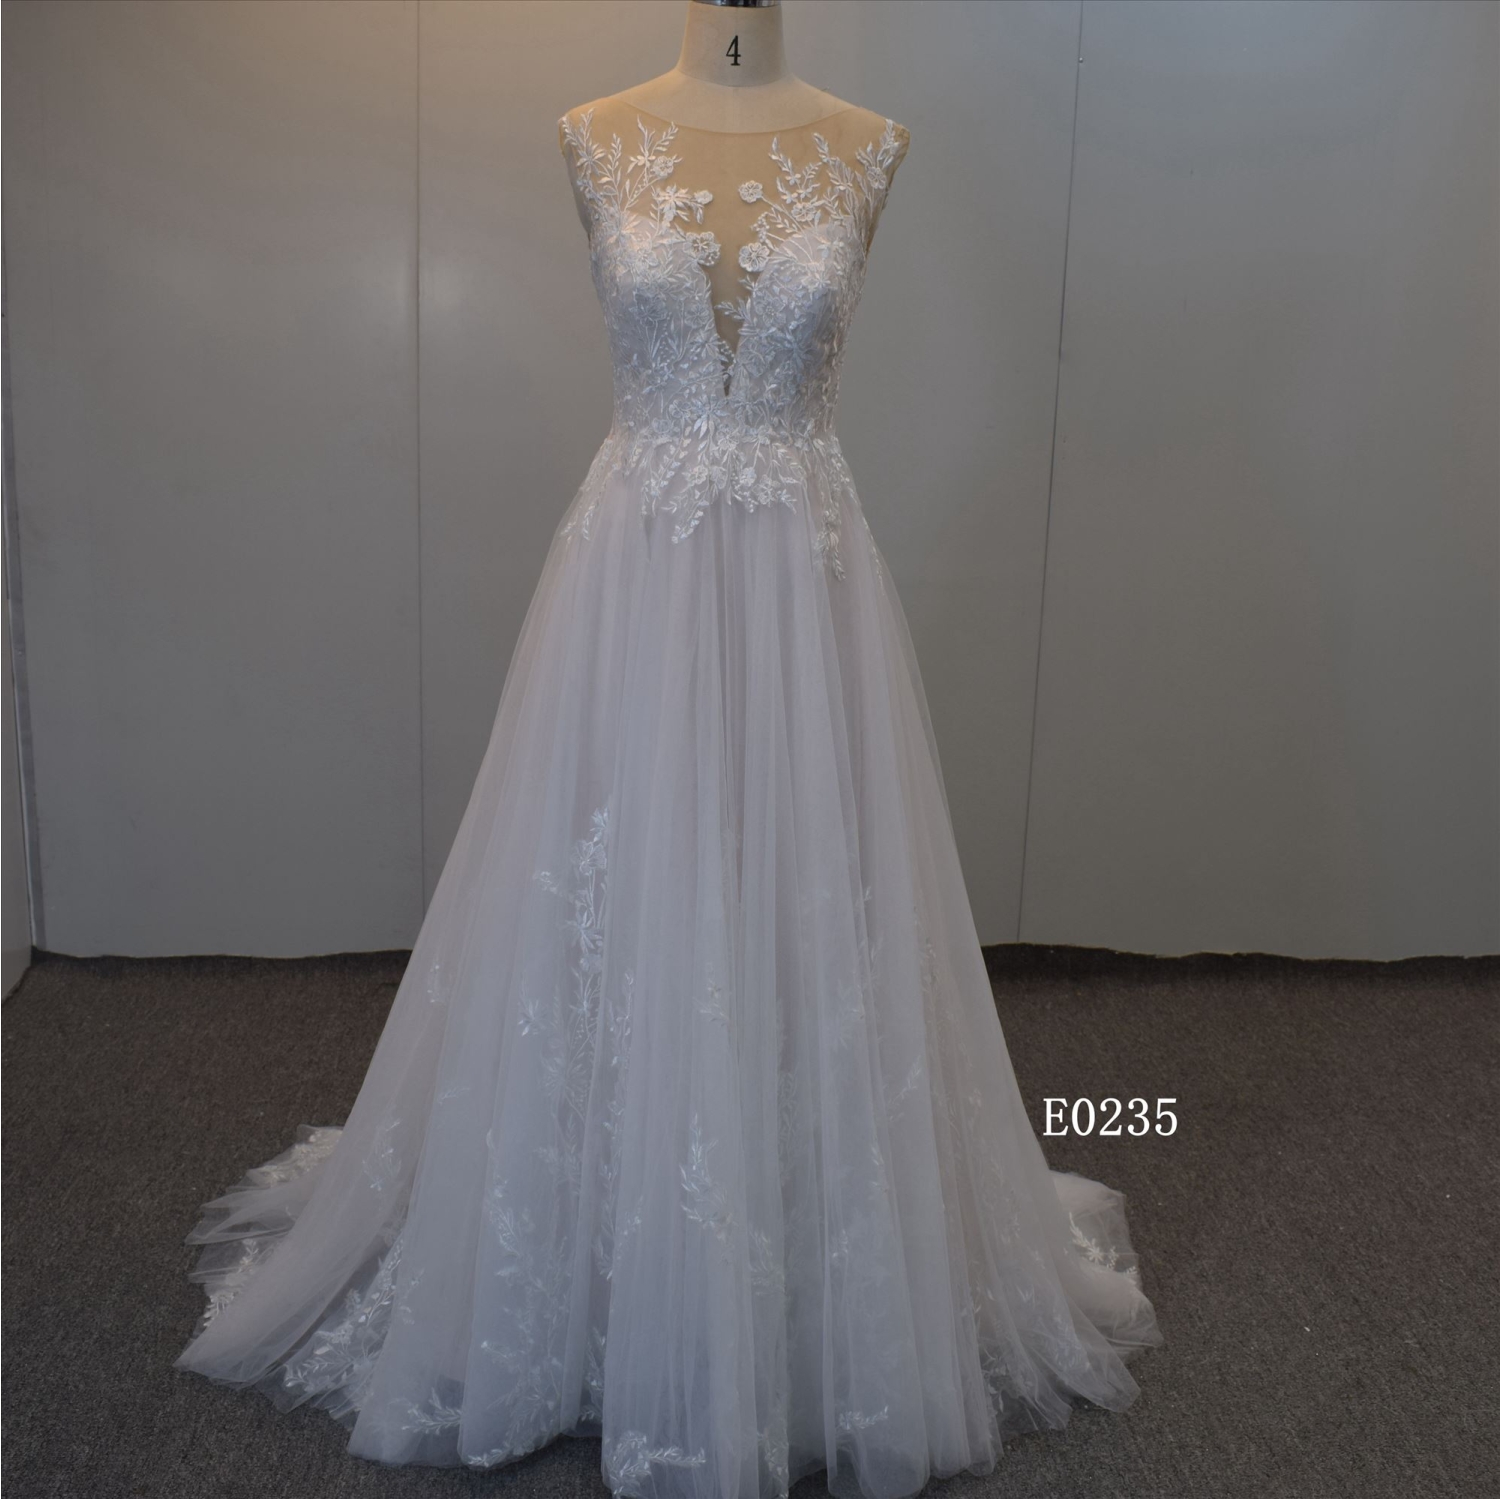 Beach Style Bridal Gown Hot Sell Wedding Gown Custom Made Bridal Gown Wholesale Bridal Dress 7448